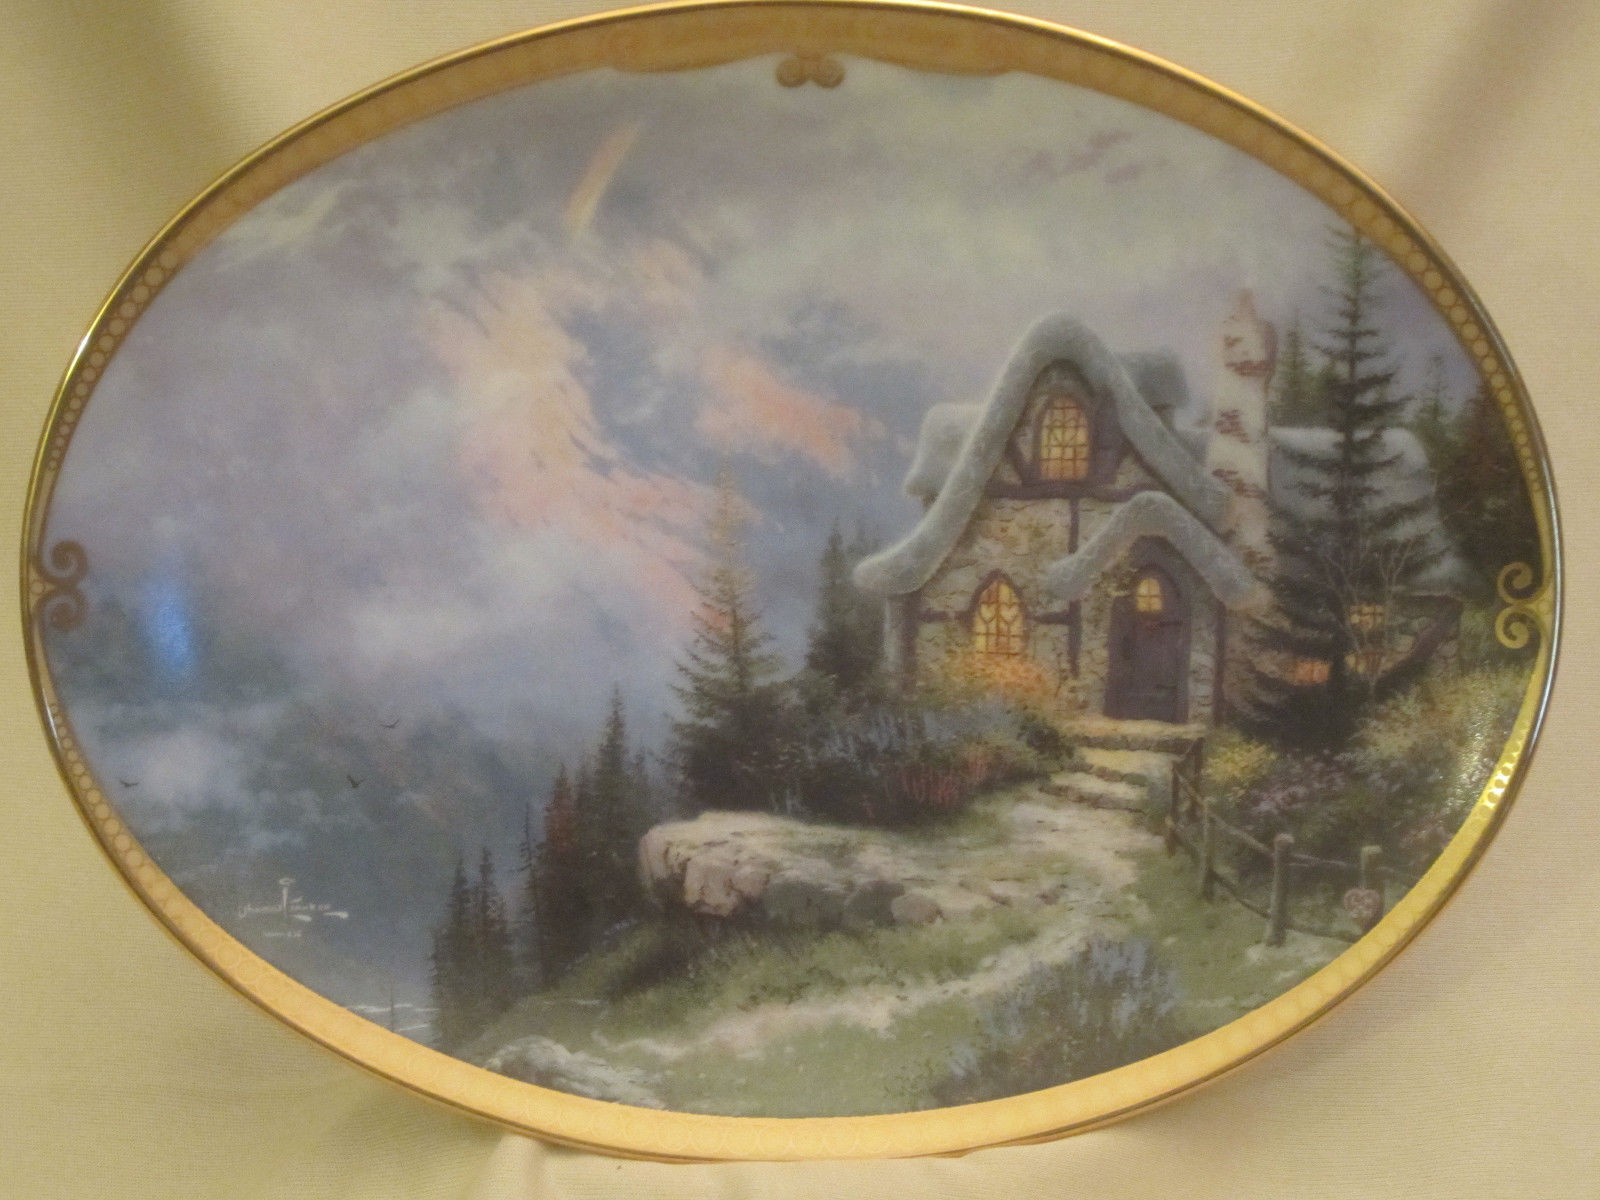 Primary image for RAINBOW'S END COTTAGE collector plate THOMAS KINKADE Scenes of Serenity BRADFORD